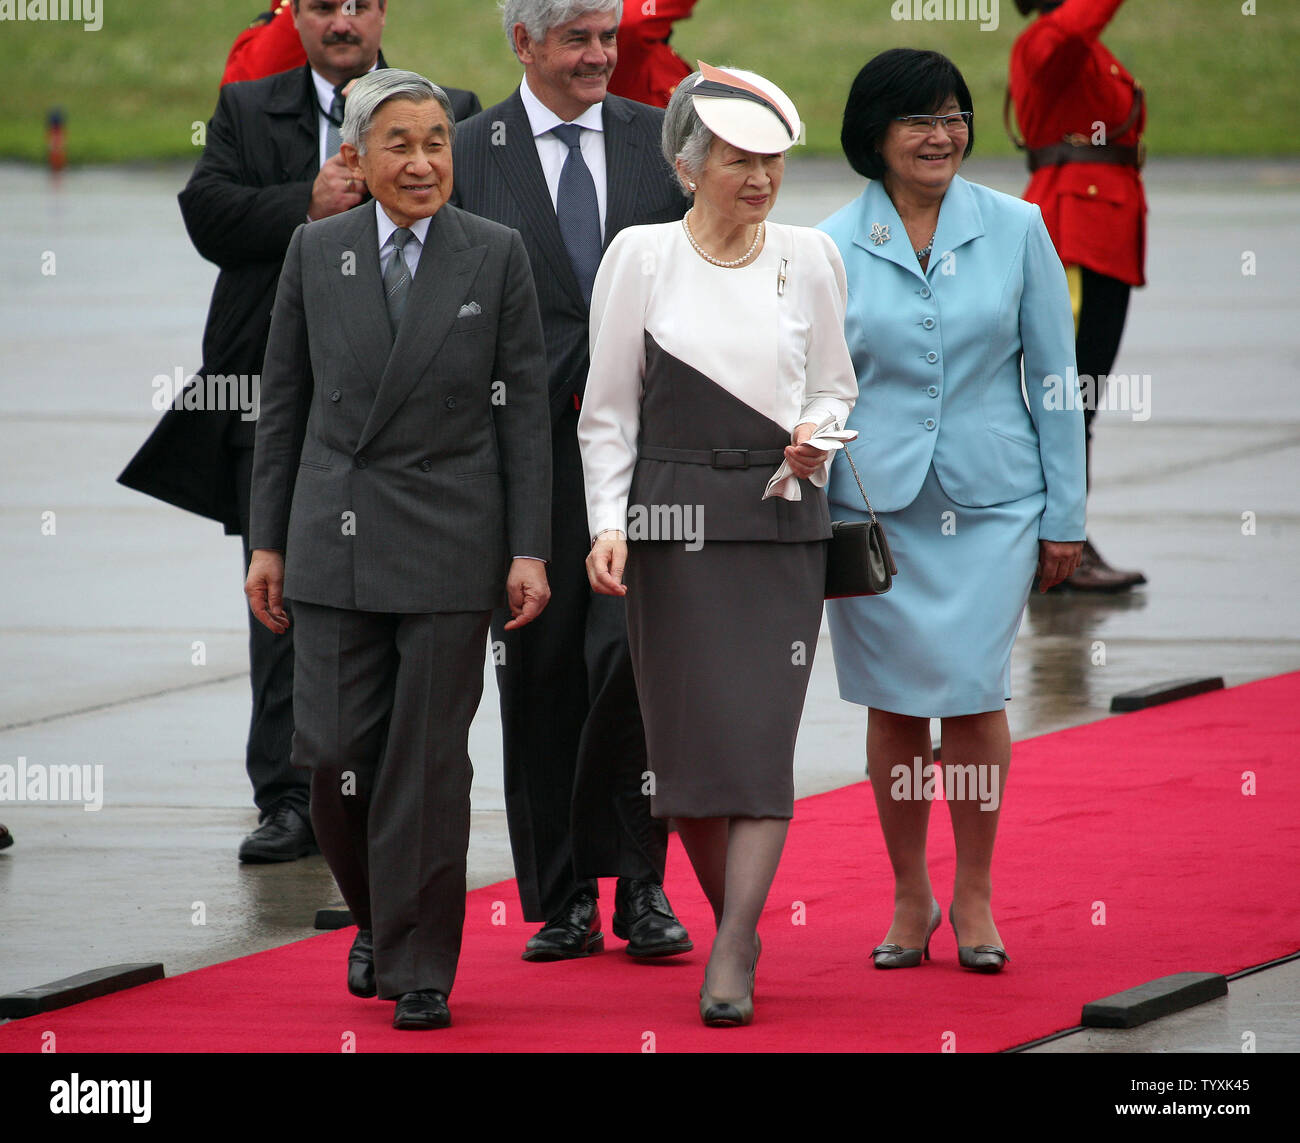 Emperor Akihito and Empress Michiko of Japan arrive at Ottawa International Airport on July 3, 2009. The Imperial Couple is visiting Canada to mark the 80th anniversary of diplomatic relations between Canada and Japan. (UPI Photo: Grace Chiu) Stock Photo